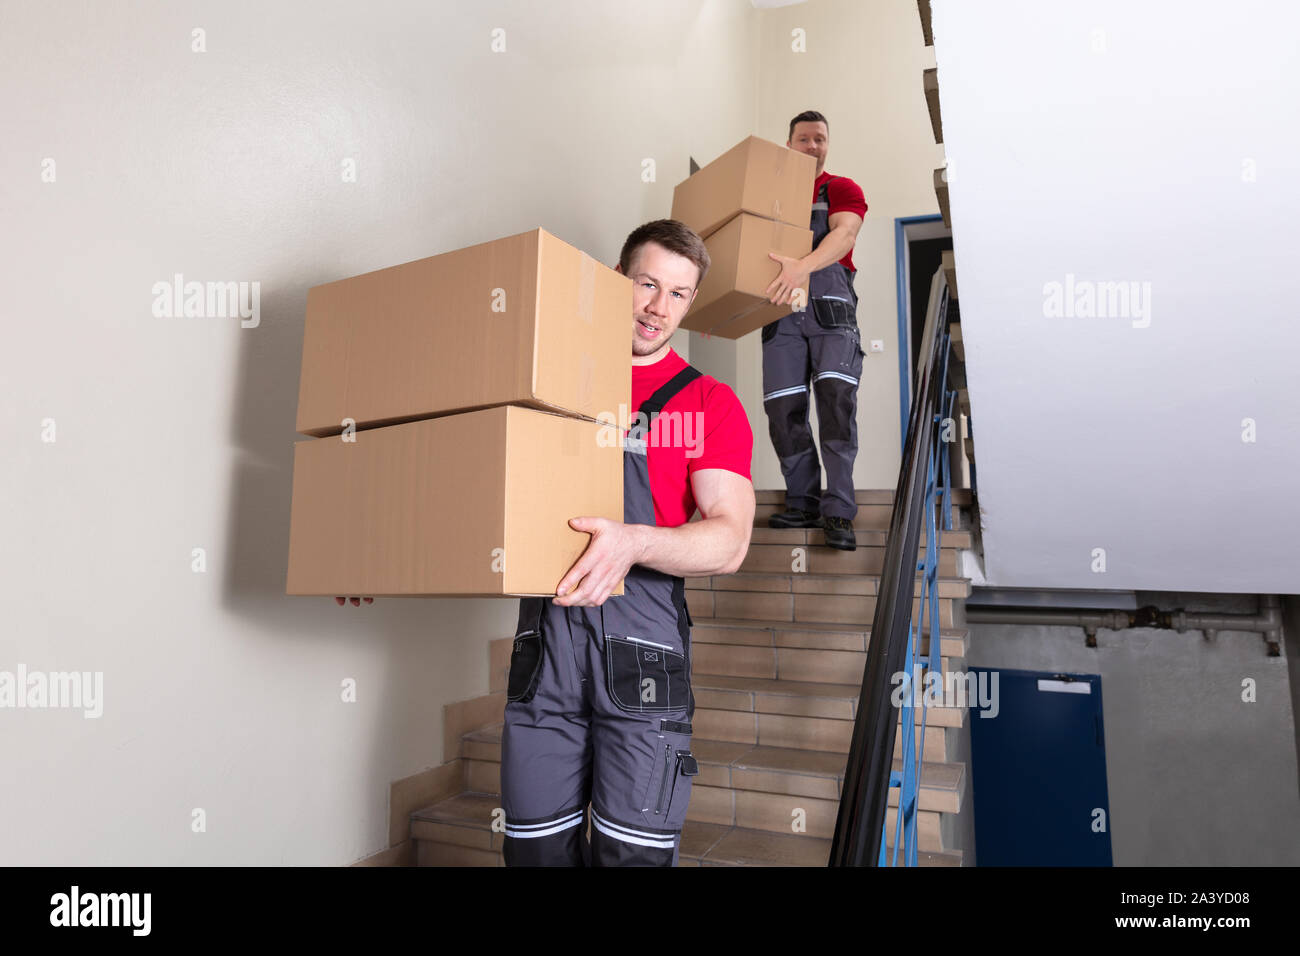 Portrait Of A Young Male Movers In Uniform Carrying Cardboard Boxes Walking Downward On Staircase Stock Photo